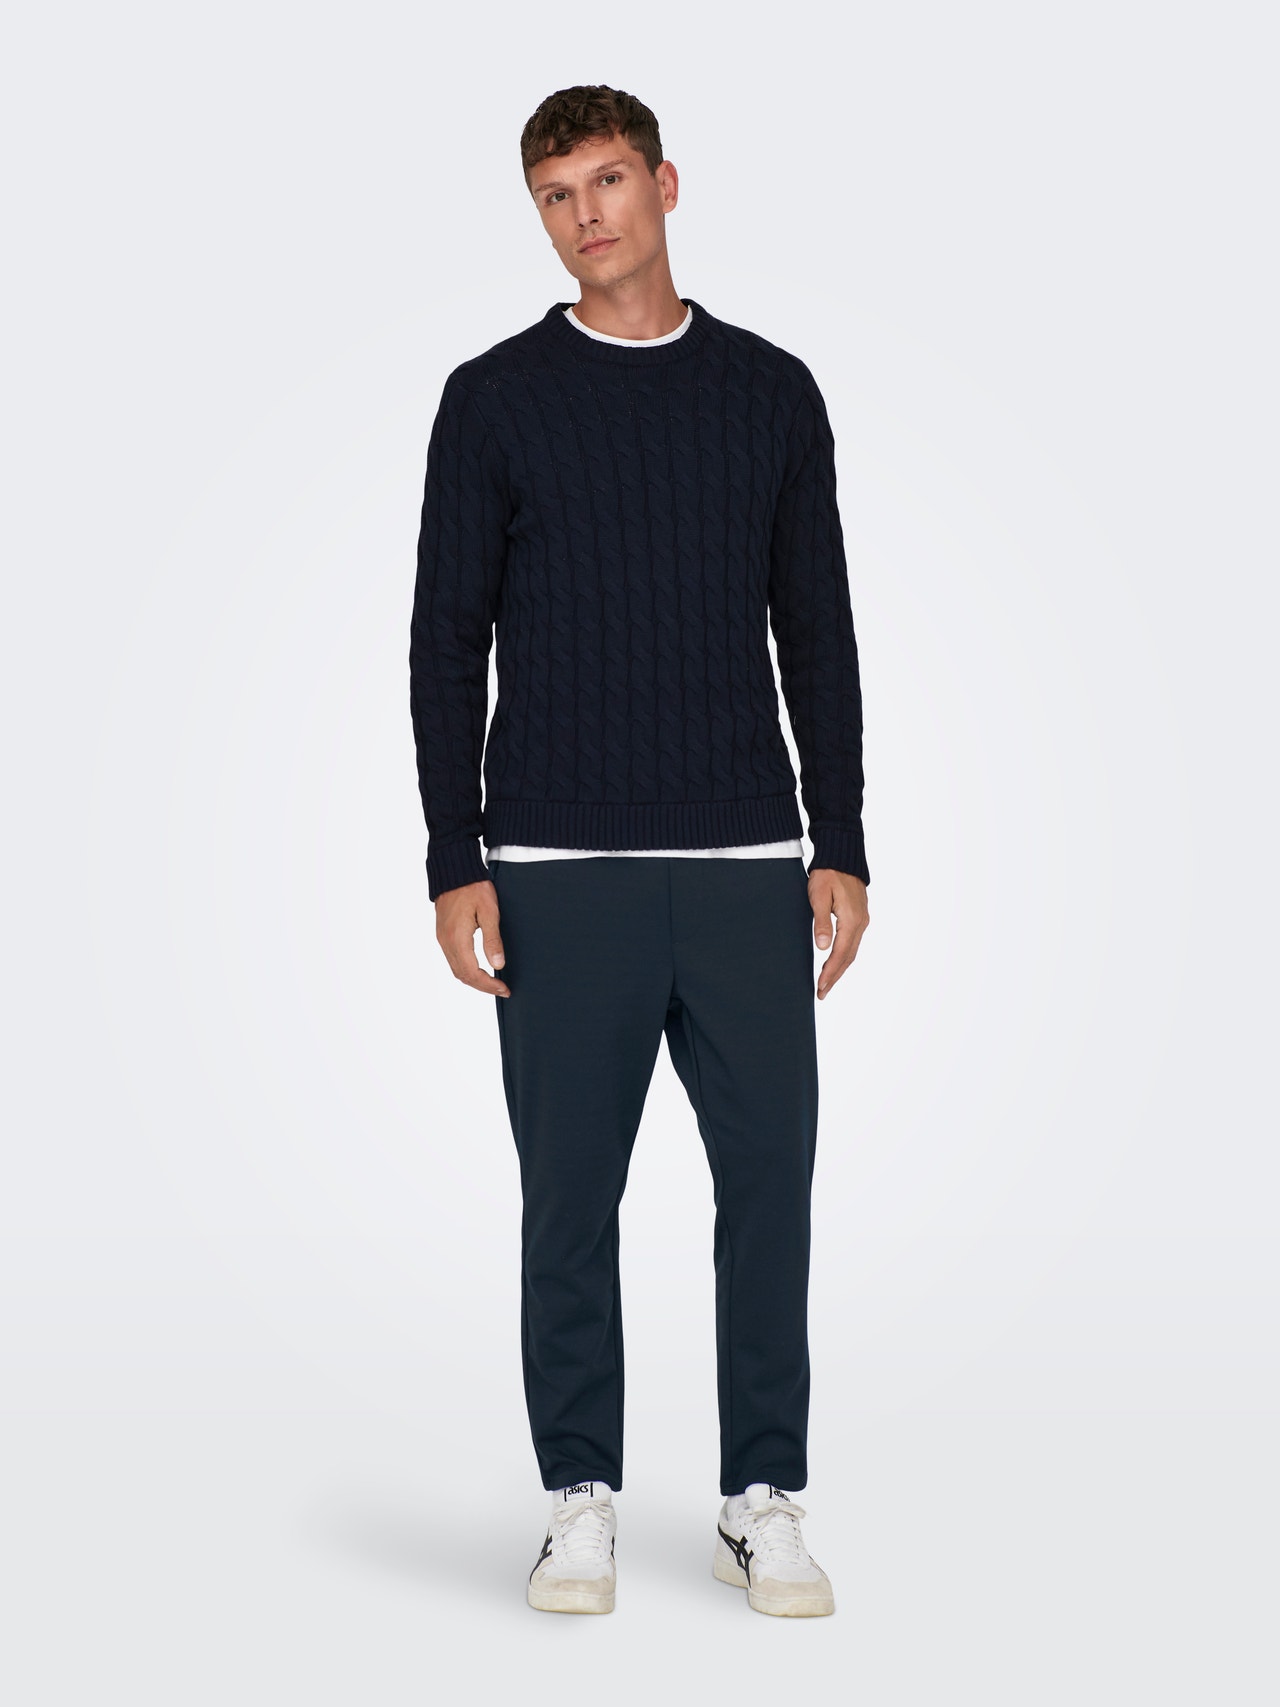 ONLY & SONS Cropped sweat pants -Dark Navy - 22022454